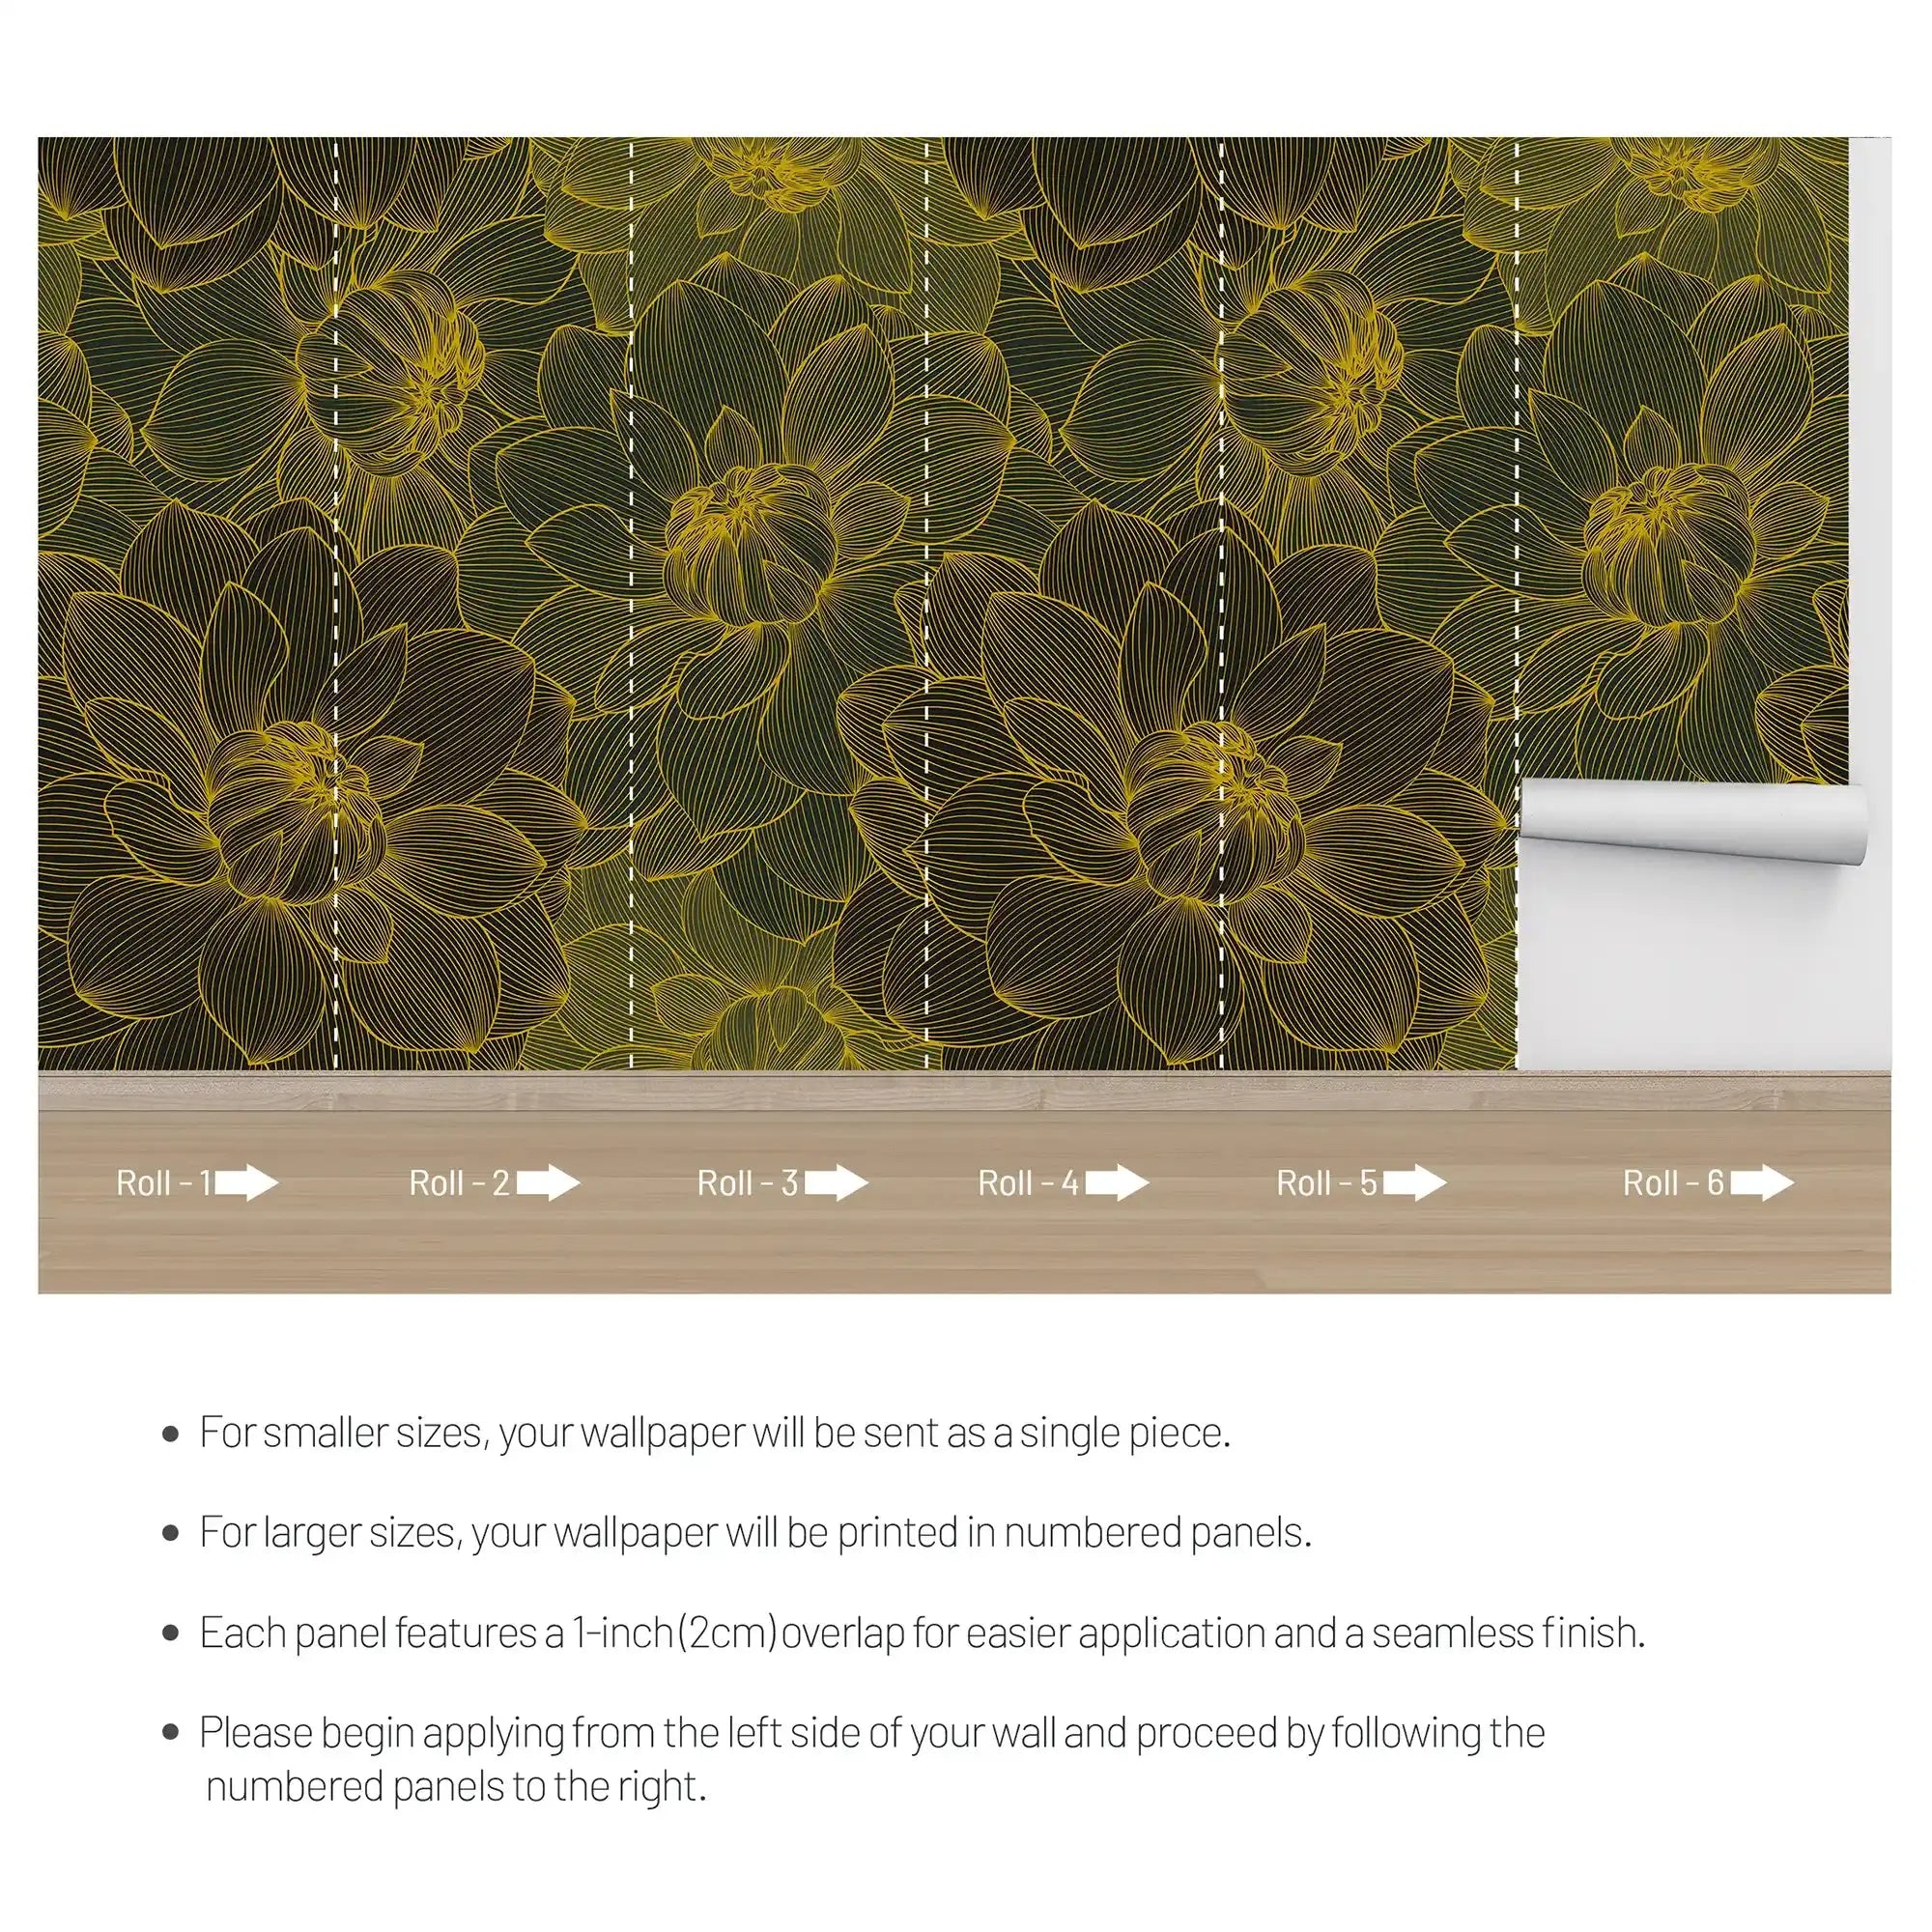 3090-C / Trendy Geometric Floral Self-Adhesive Wallpaper: Transform Your Walls with Easy Install - Artevella